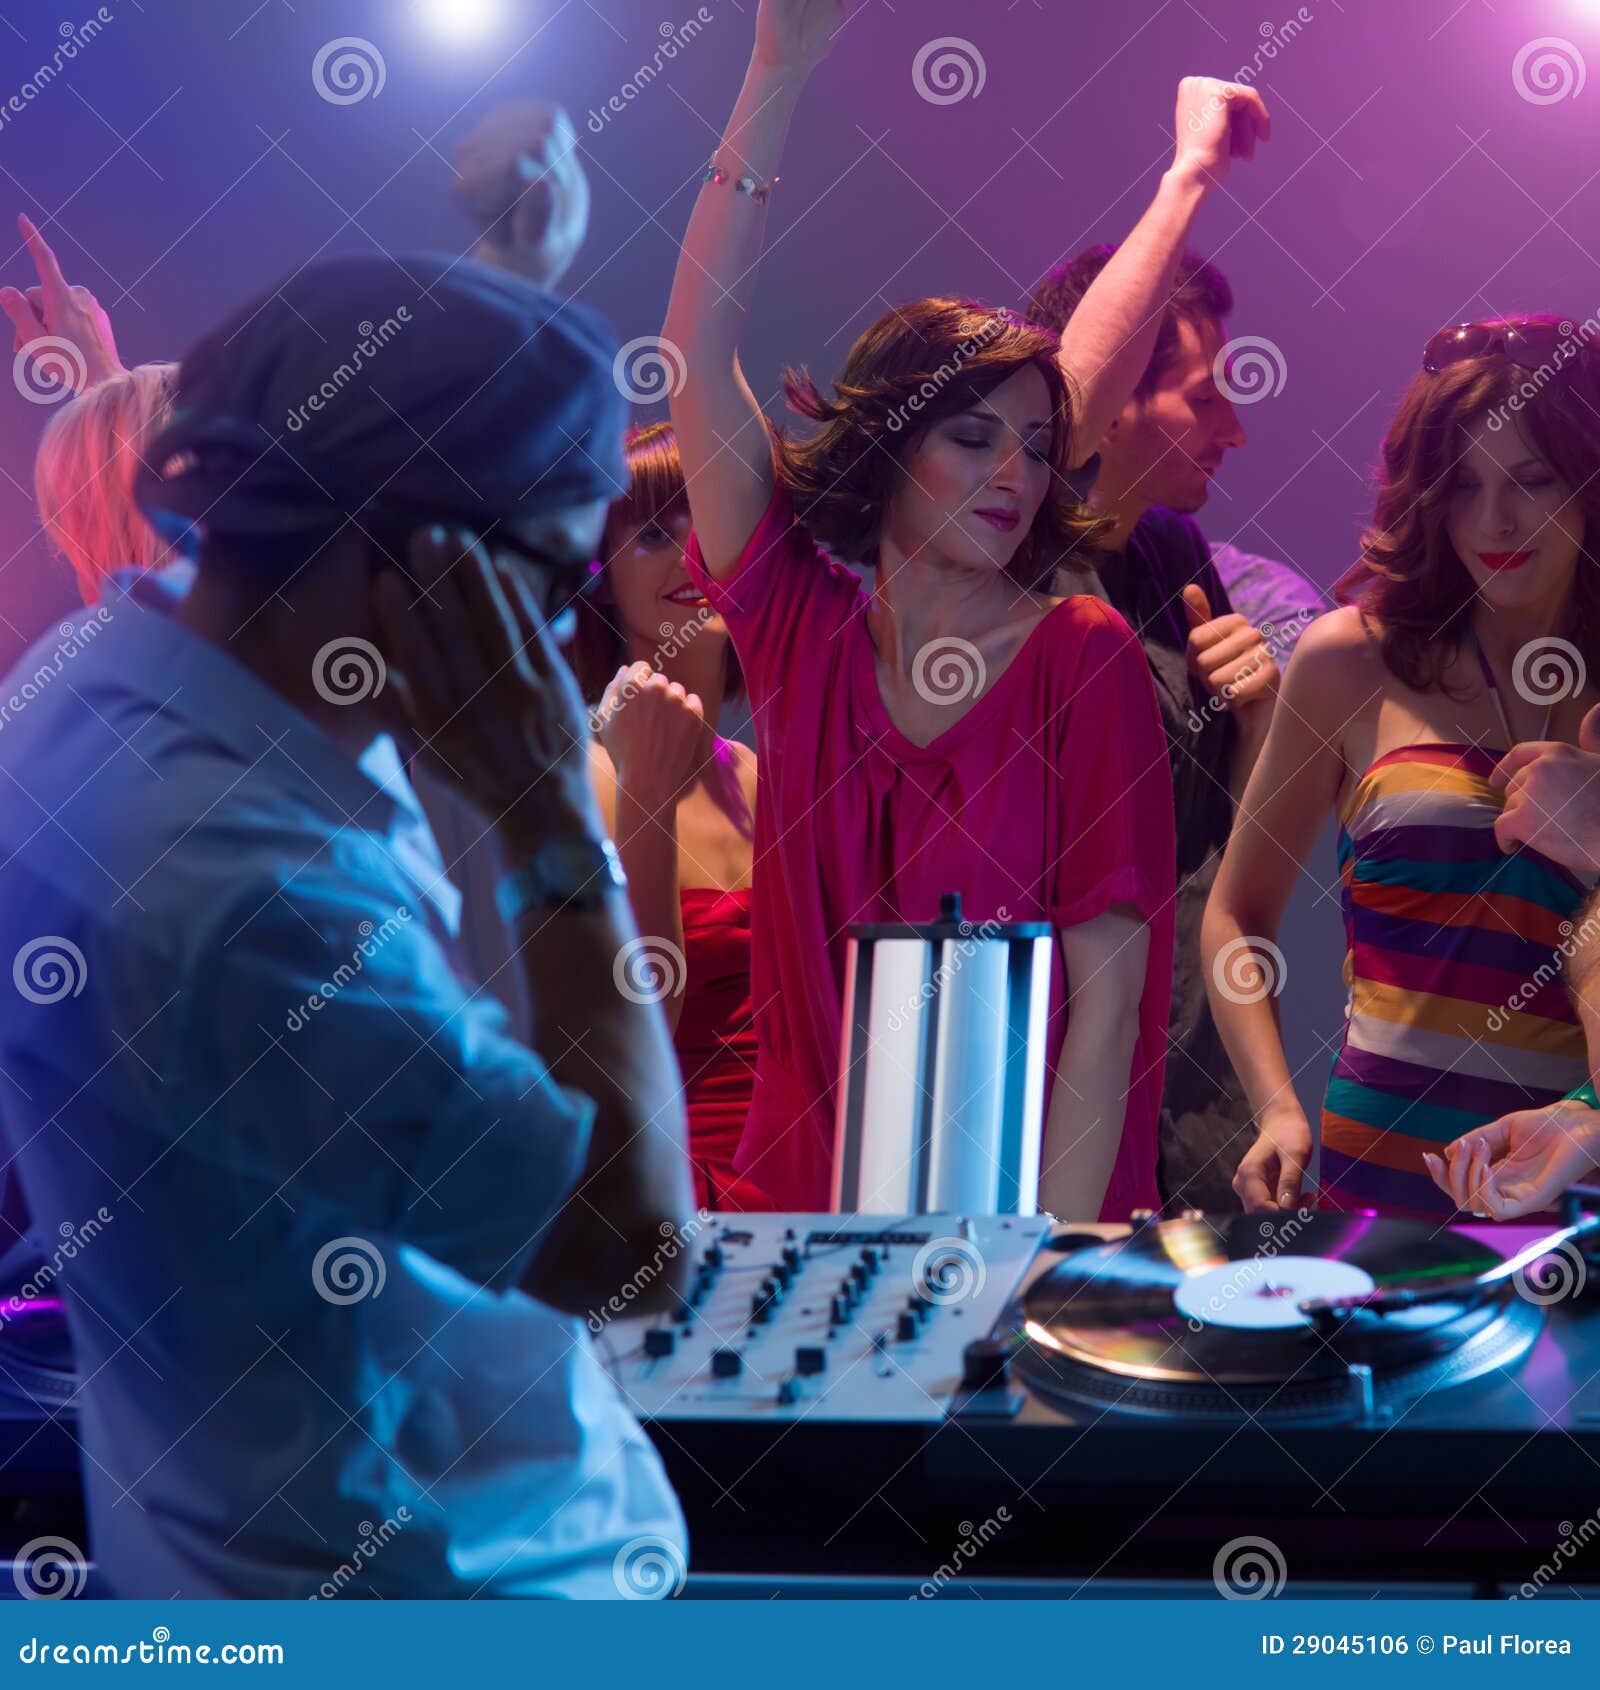 Male Dj Mixing Music at Party with Dancing People Stock Photo - Image ...